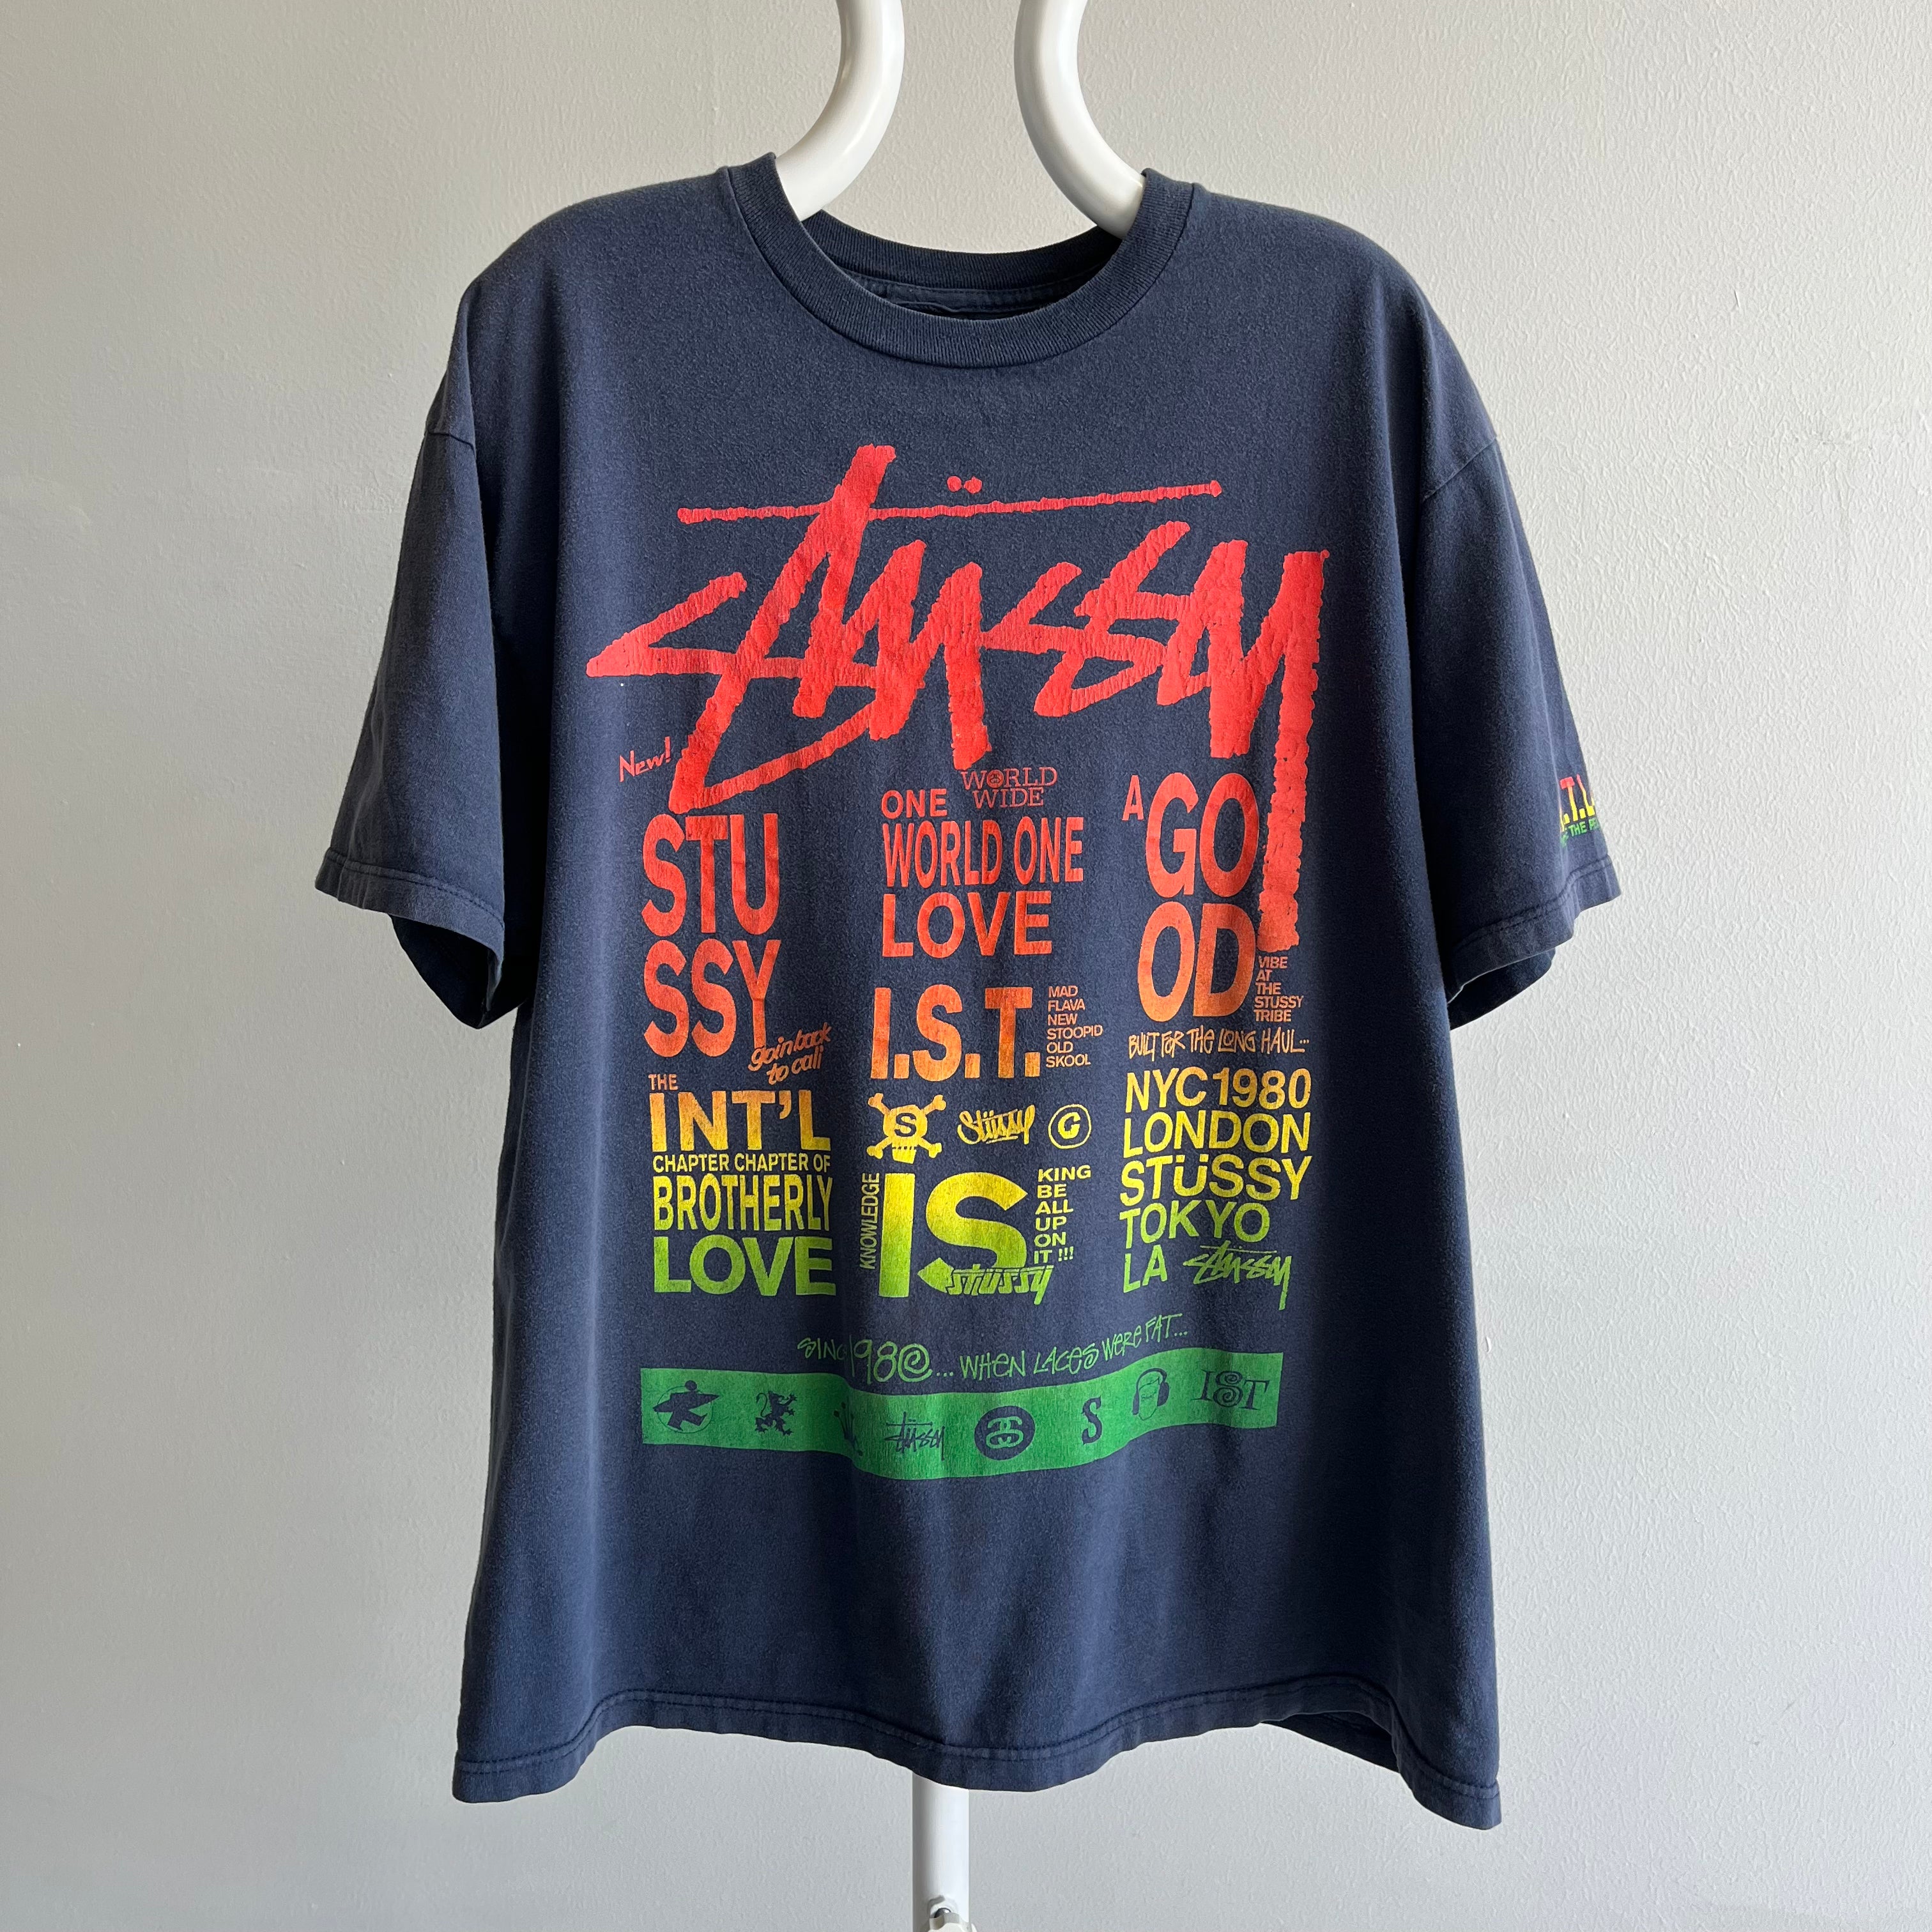 Vintage New Stussy White Grey Stay Paid Tee T-Shirt Large